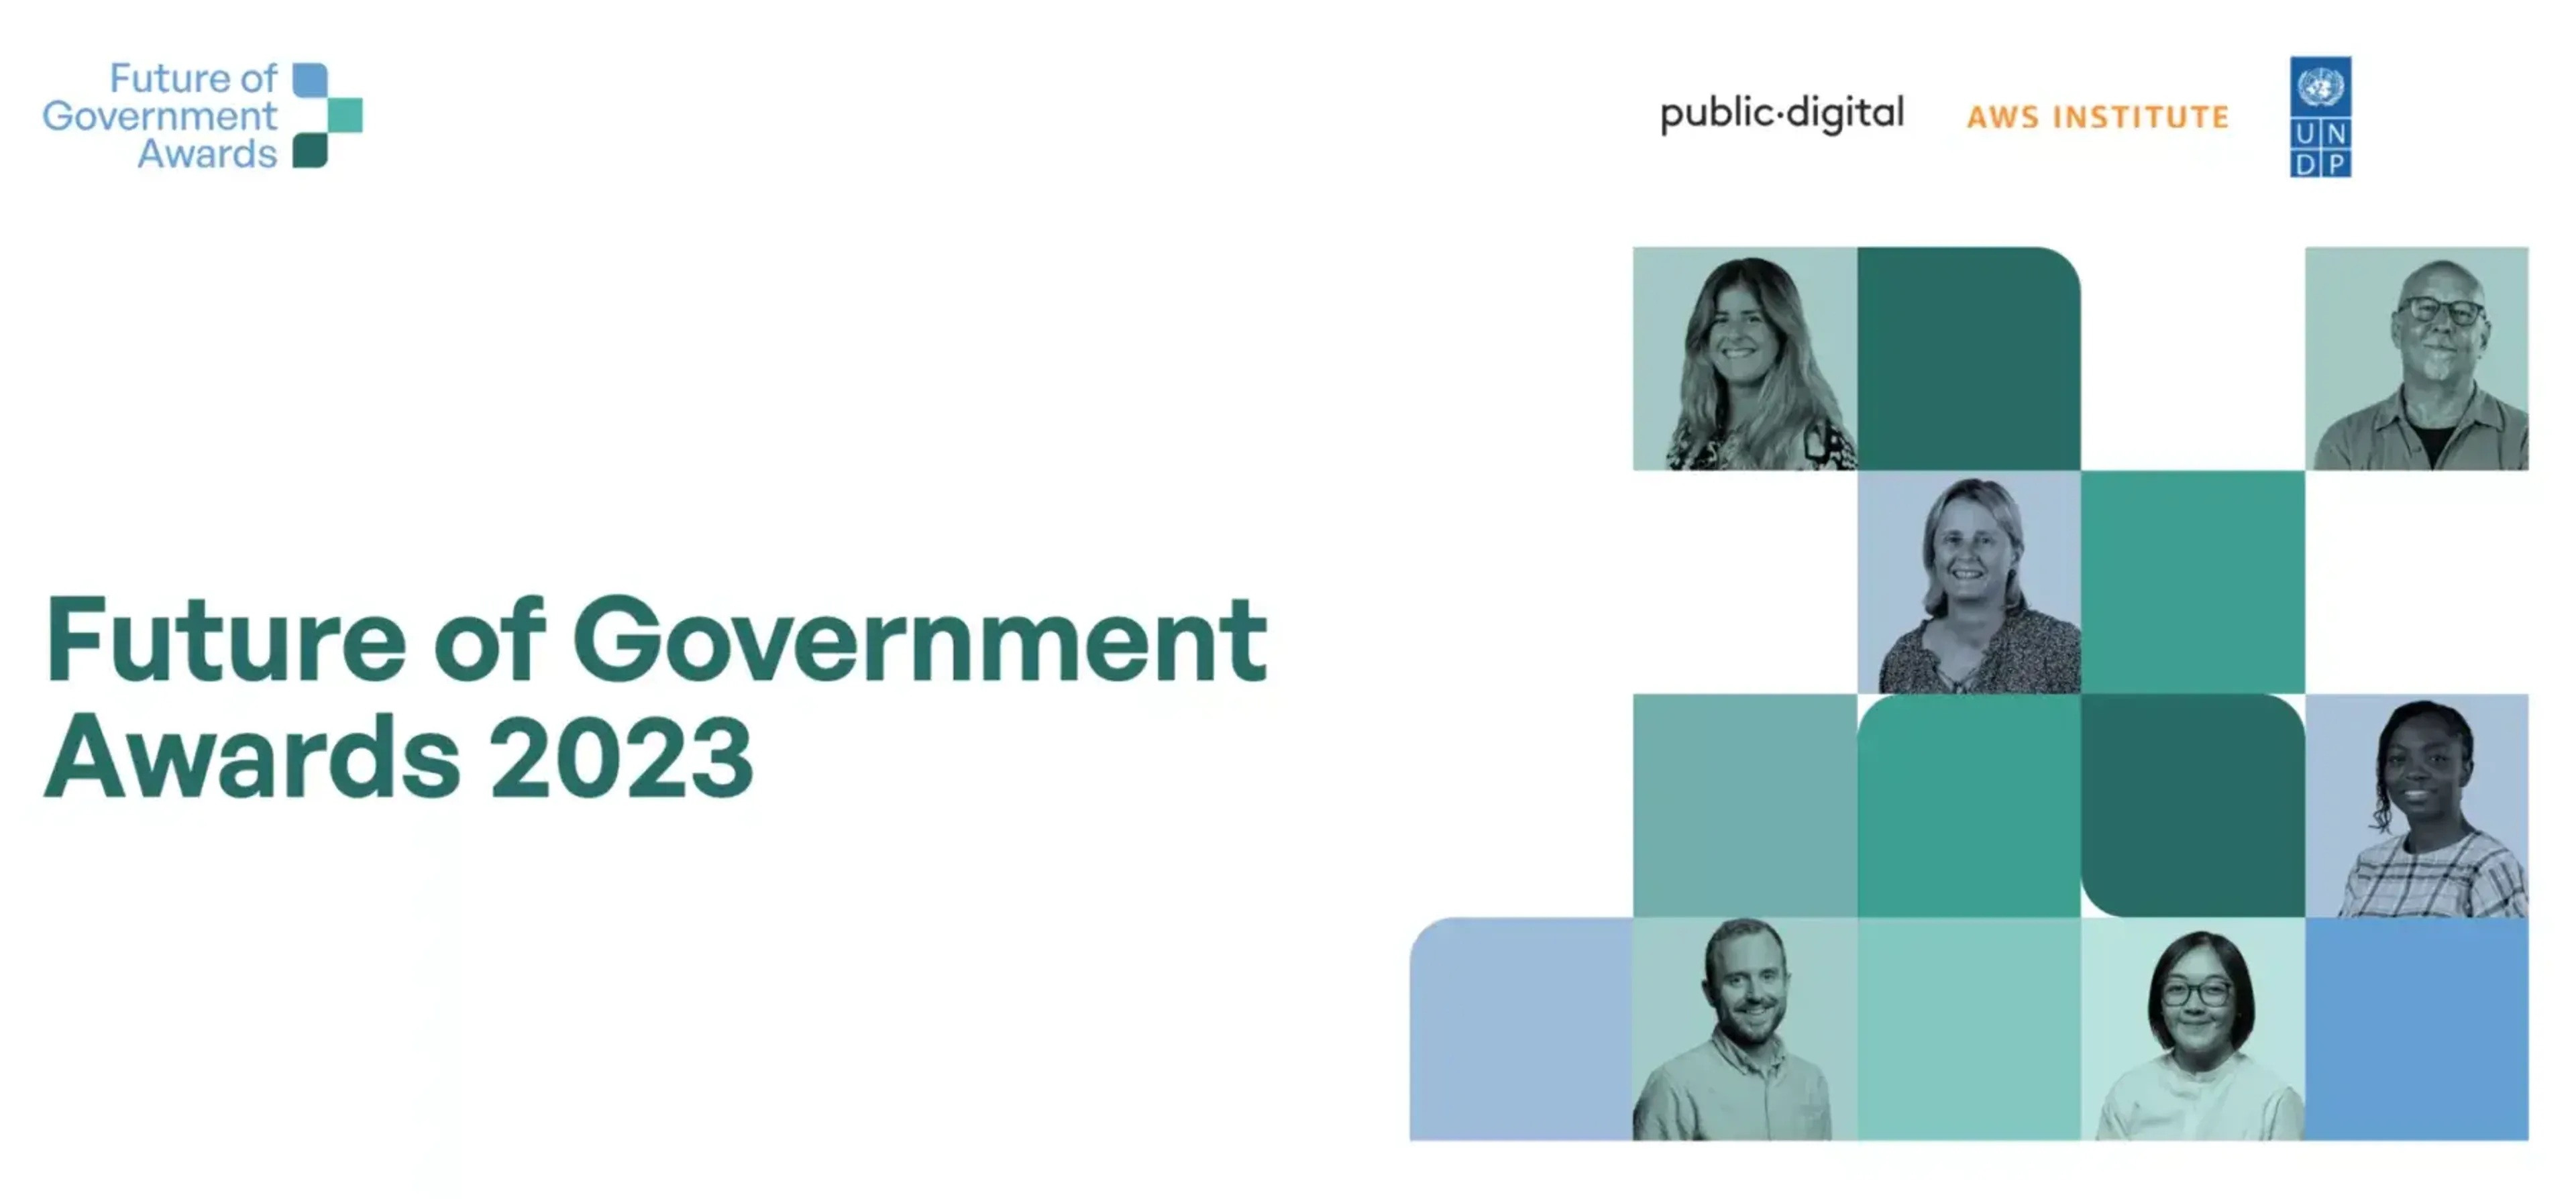 The Future of Government Awards banner